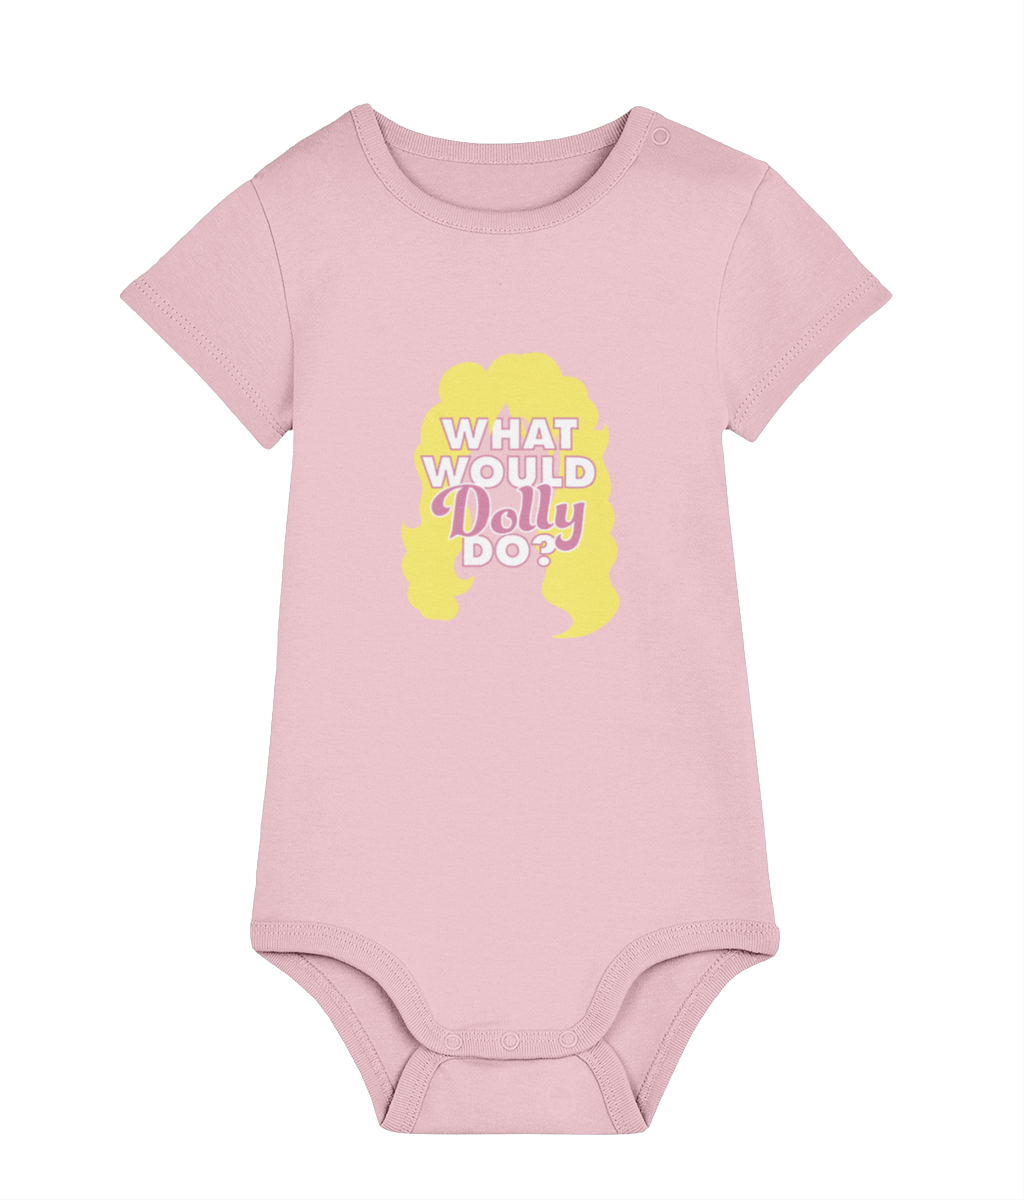 What Would Dolly Do? Baby Grow, Inspire your child with the timeless values of Dolly Parton